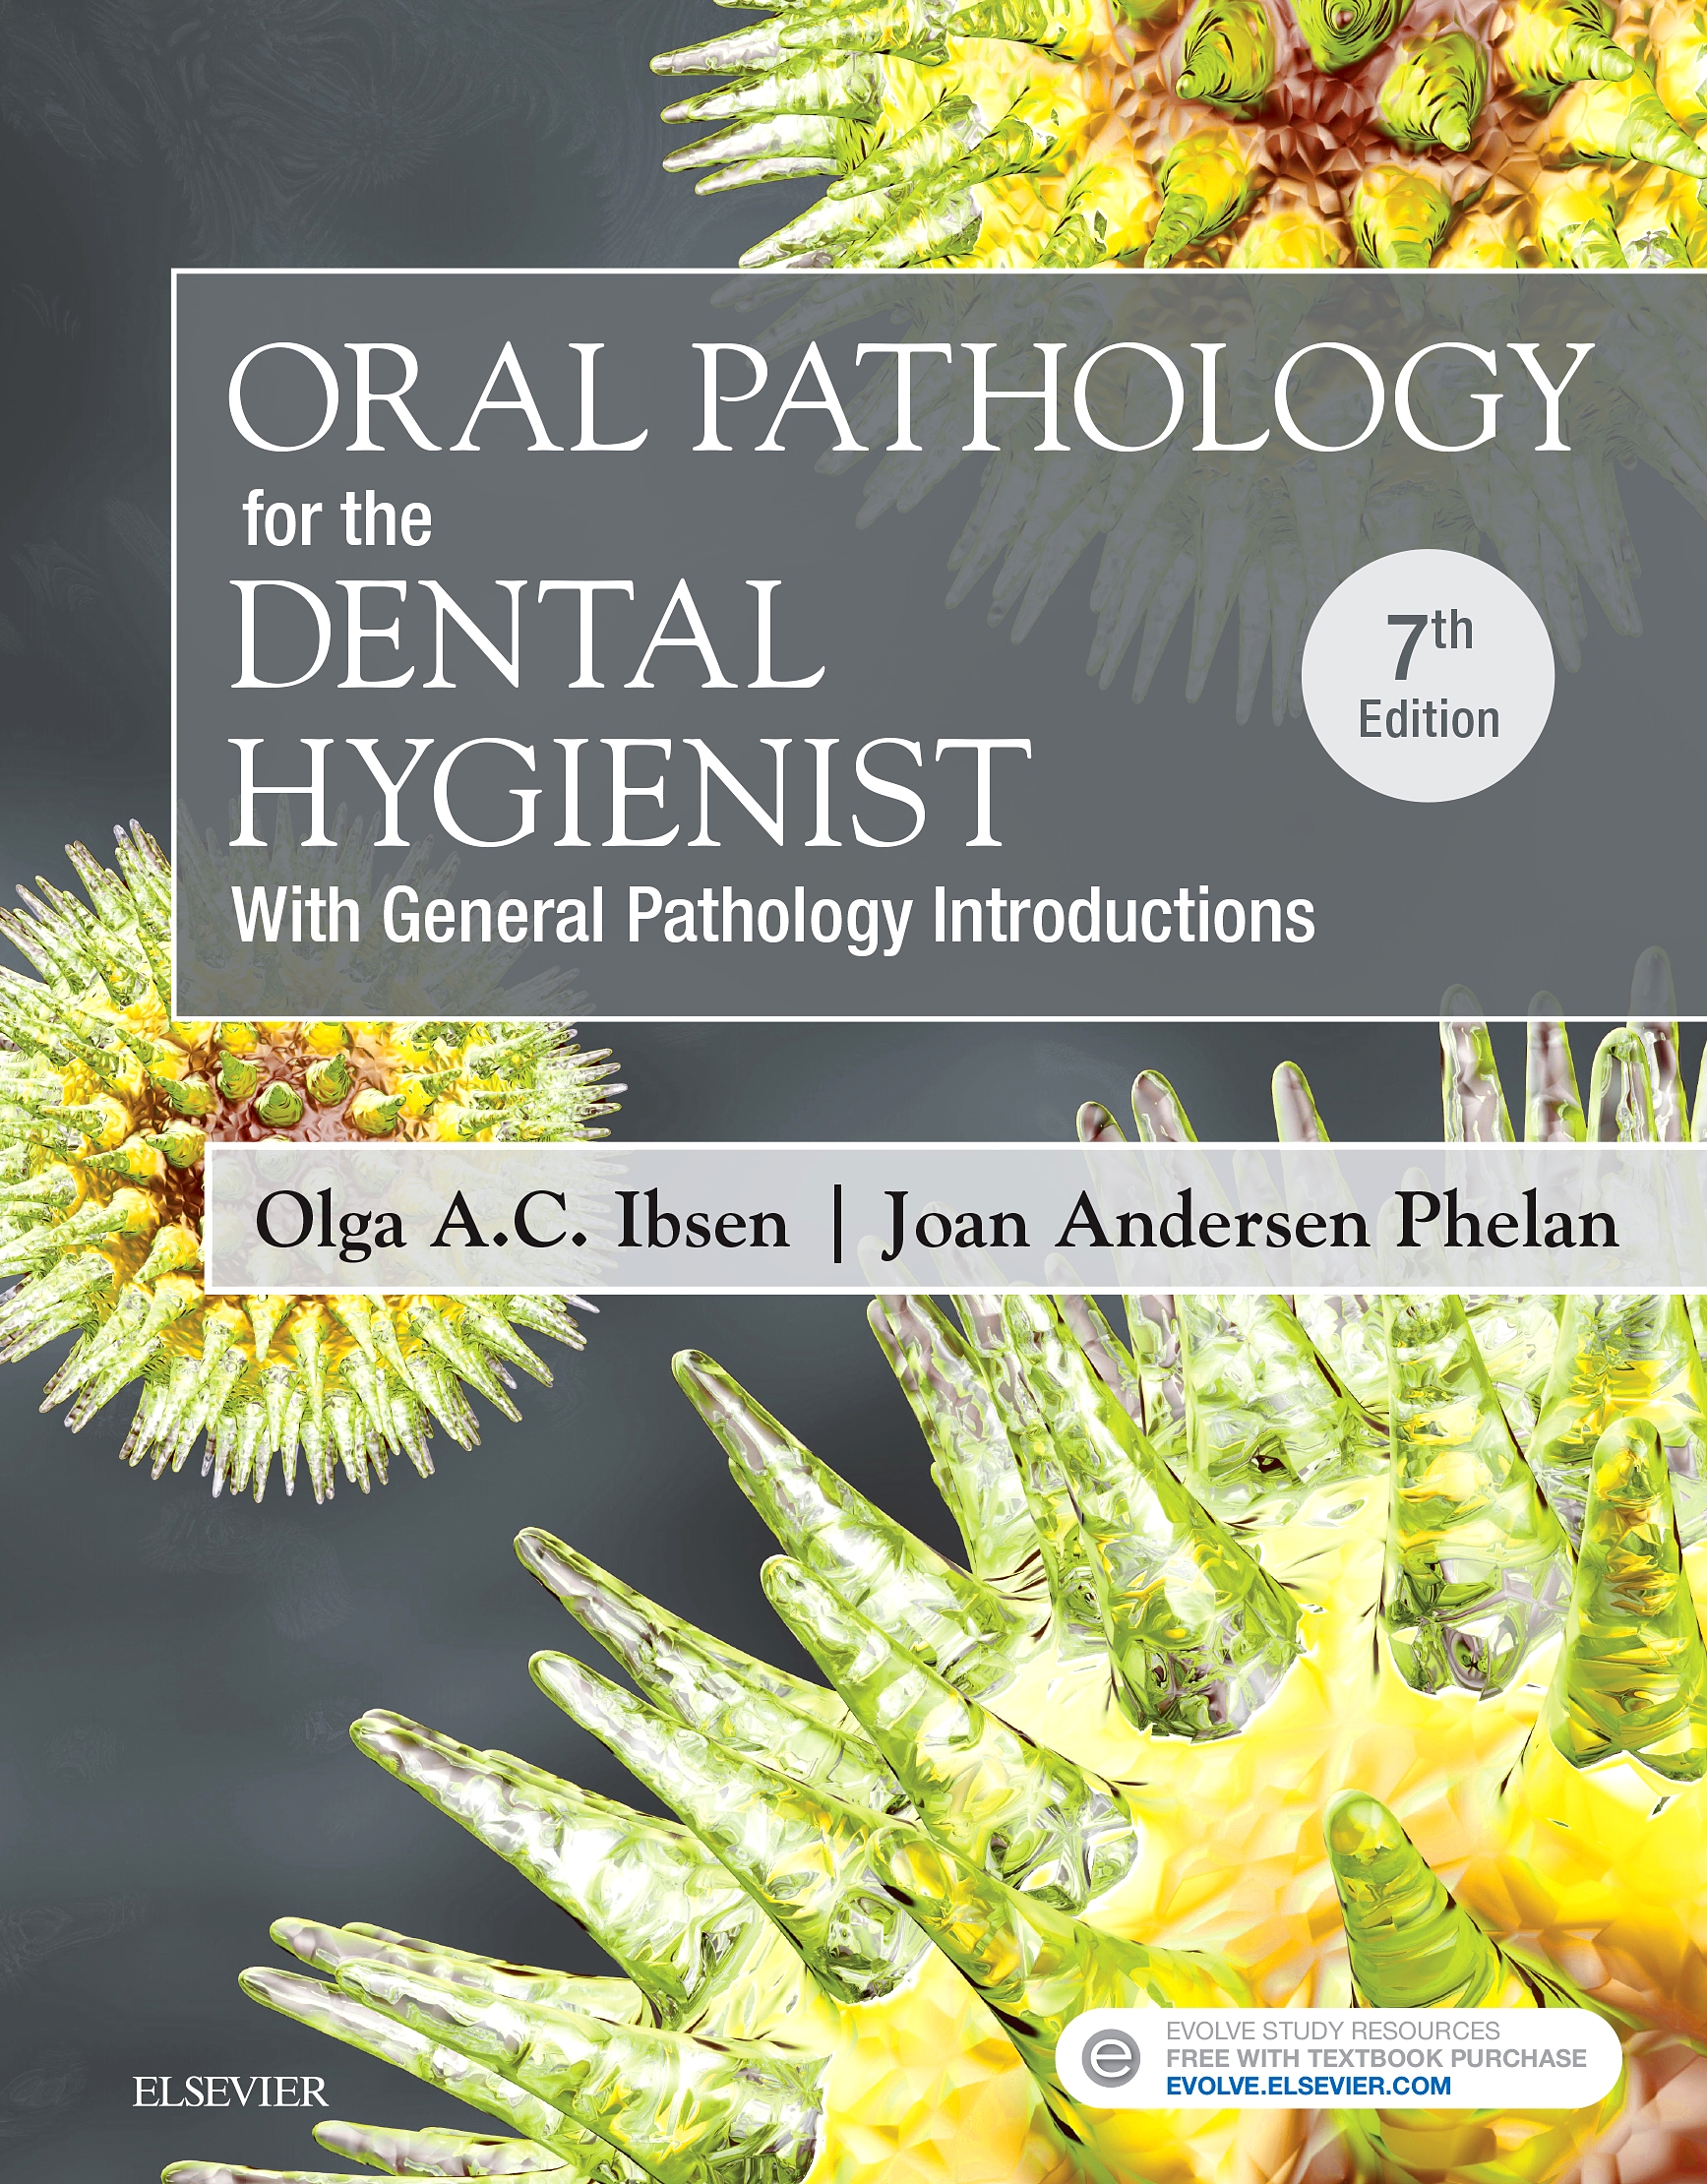 Evolve Resources for Oral Pathology for the Dental Hygienist, 7th Edition